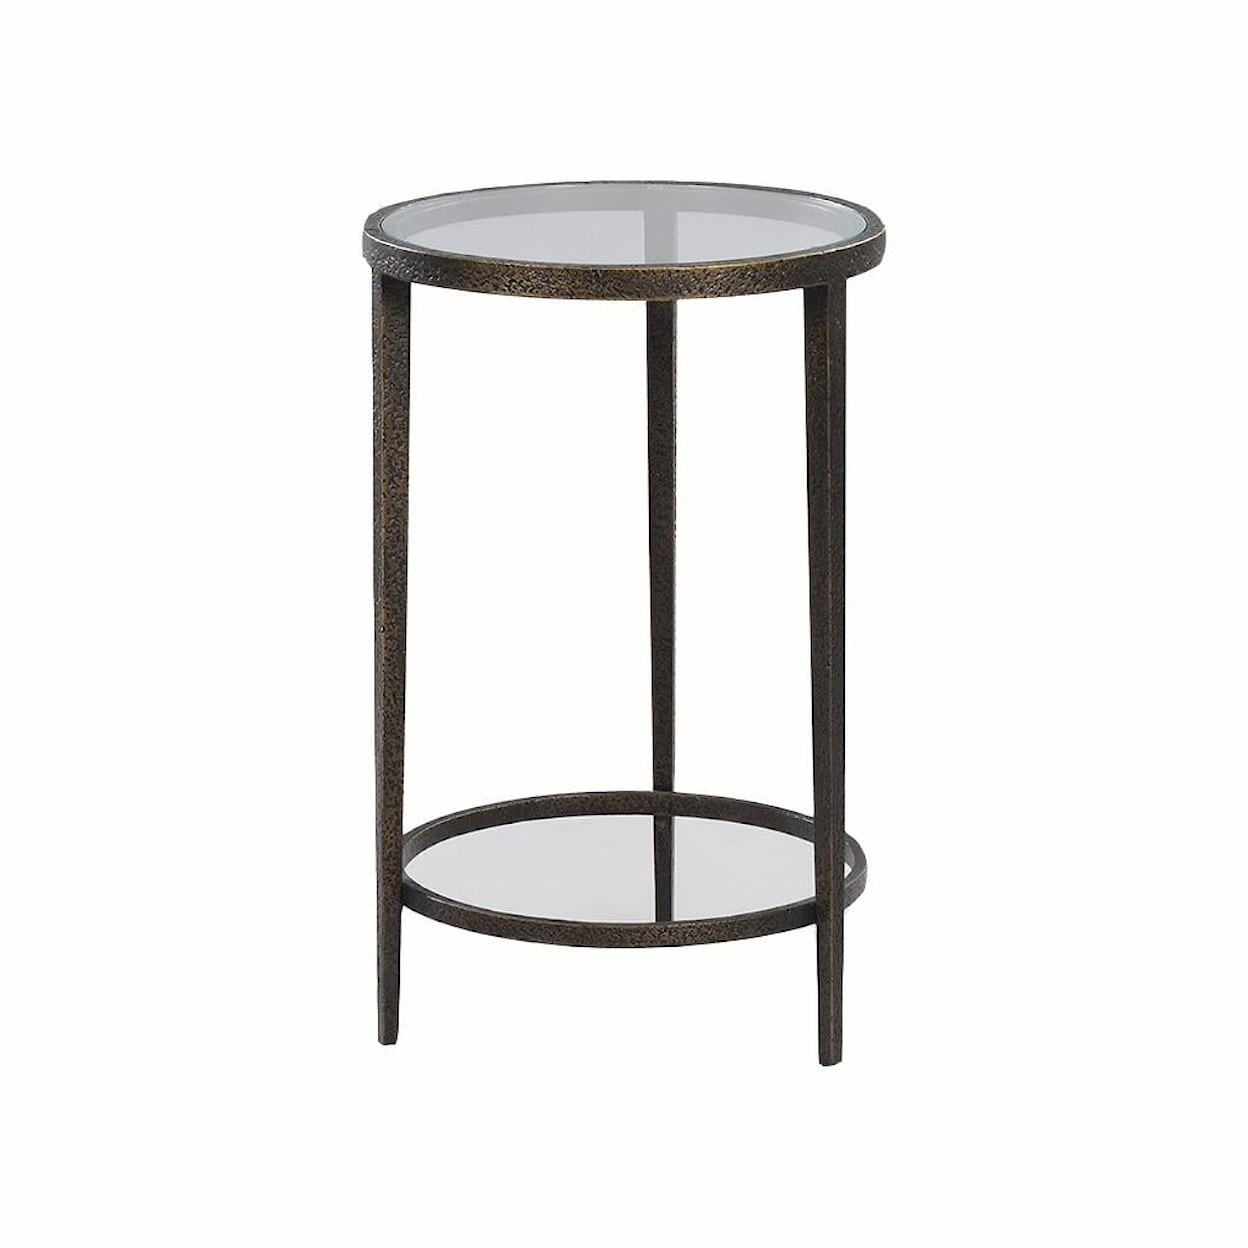 Oliver Home Furnishings End/ Side Tables SMALL ROUND SPOT TABLE